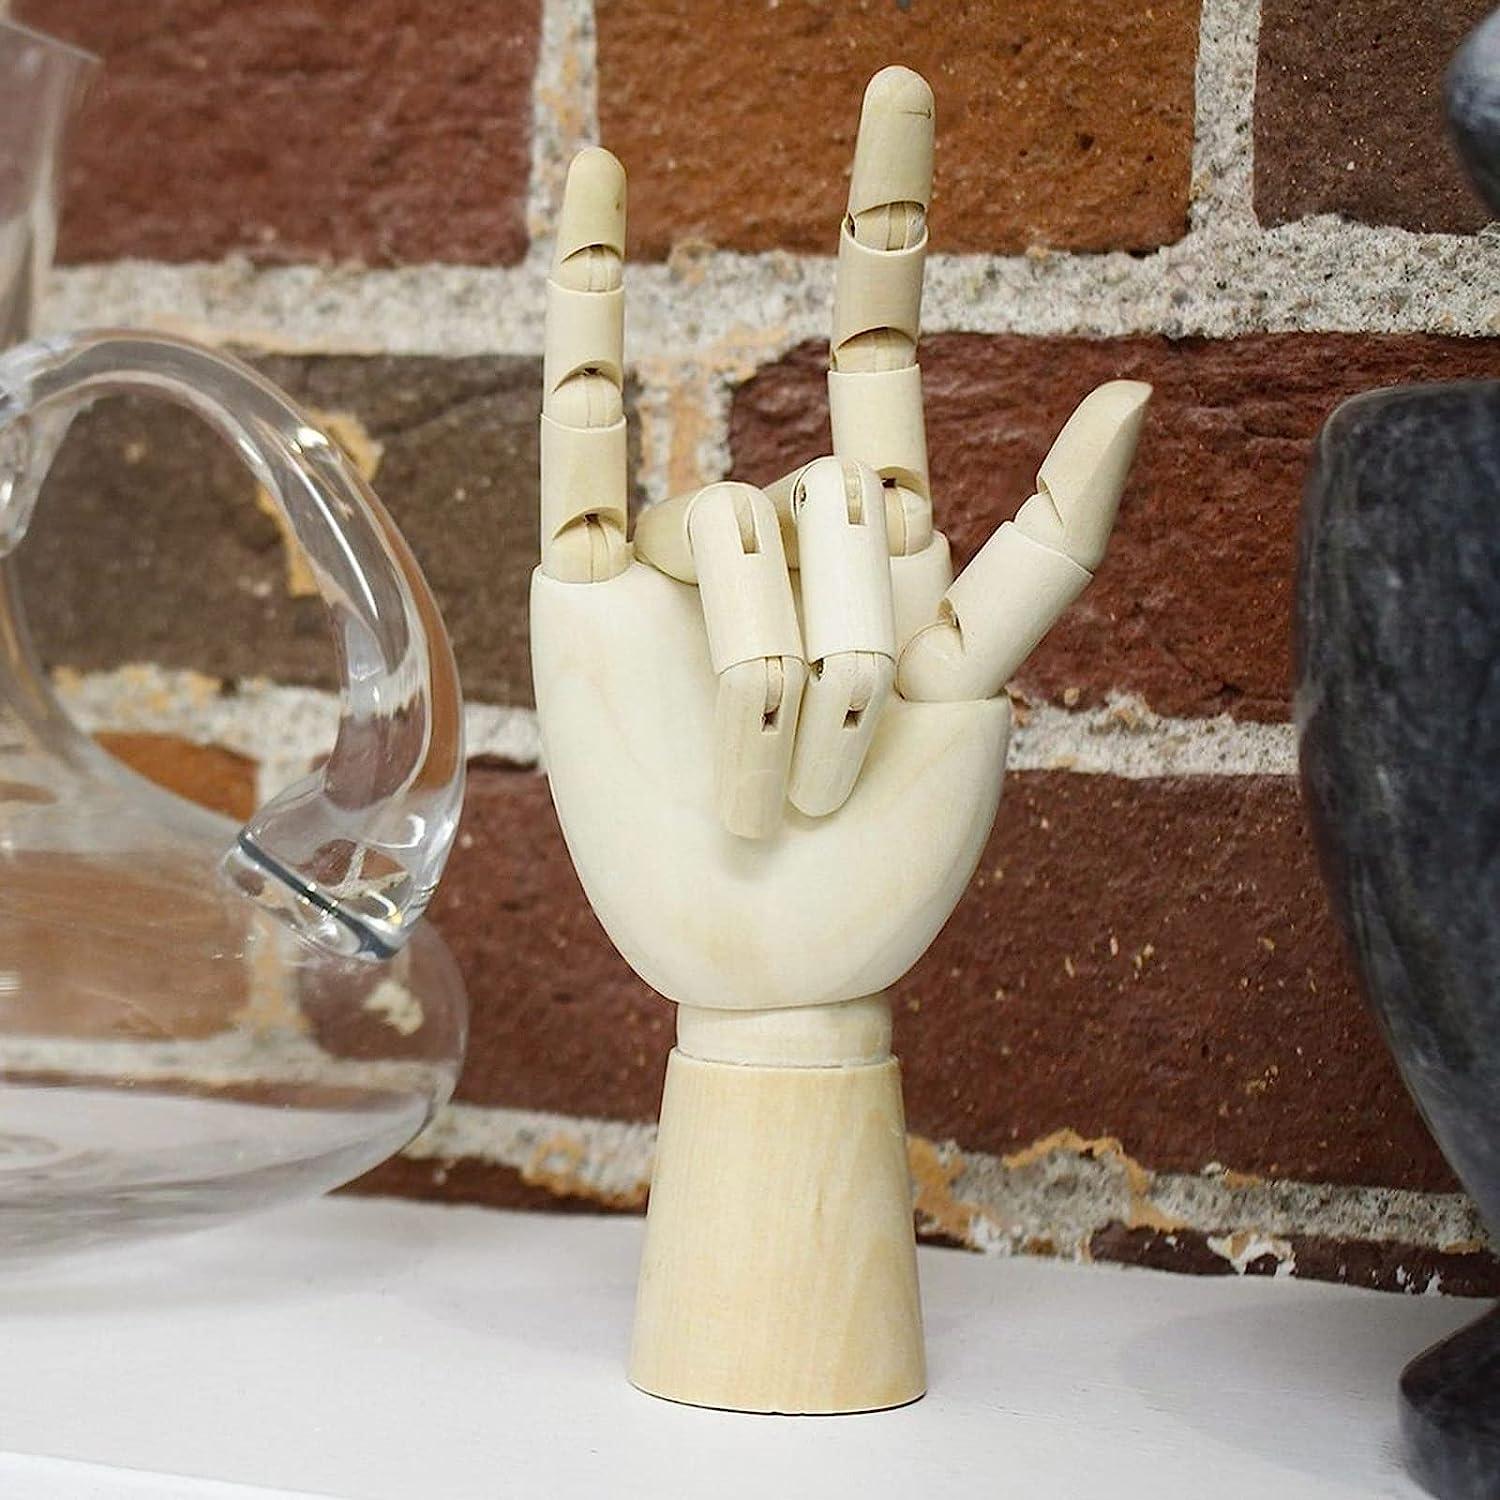 Wood Hand Jewelry Display, Ring Display Stand, Necklace Display Holder,  Jointed Hand Mannequin, Male Man Jewelry Display 